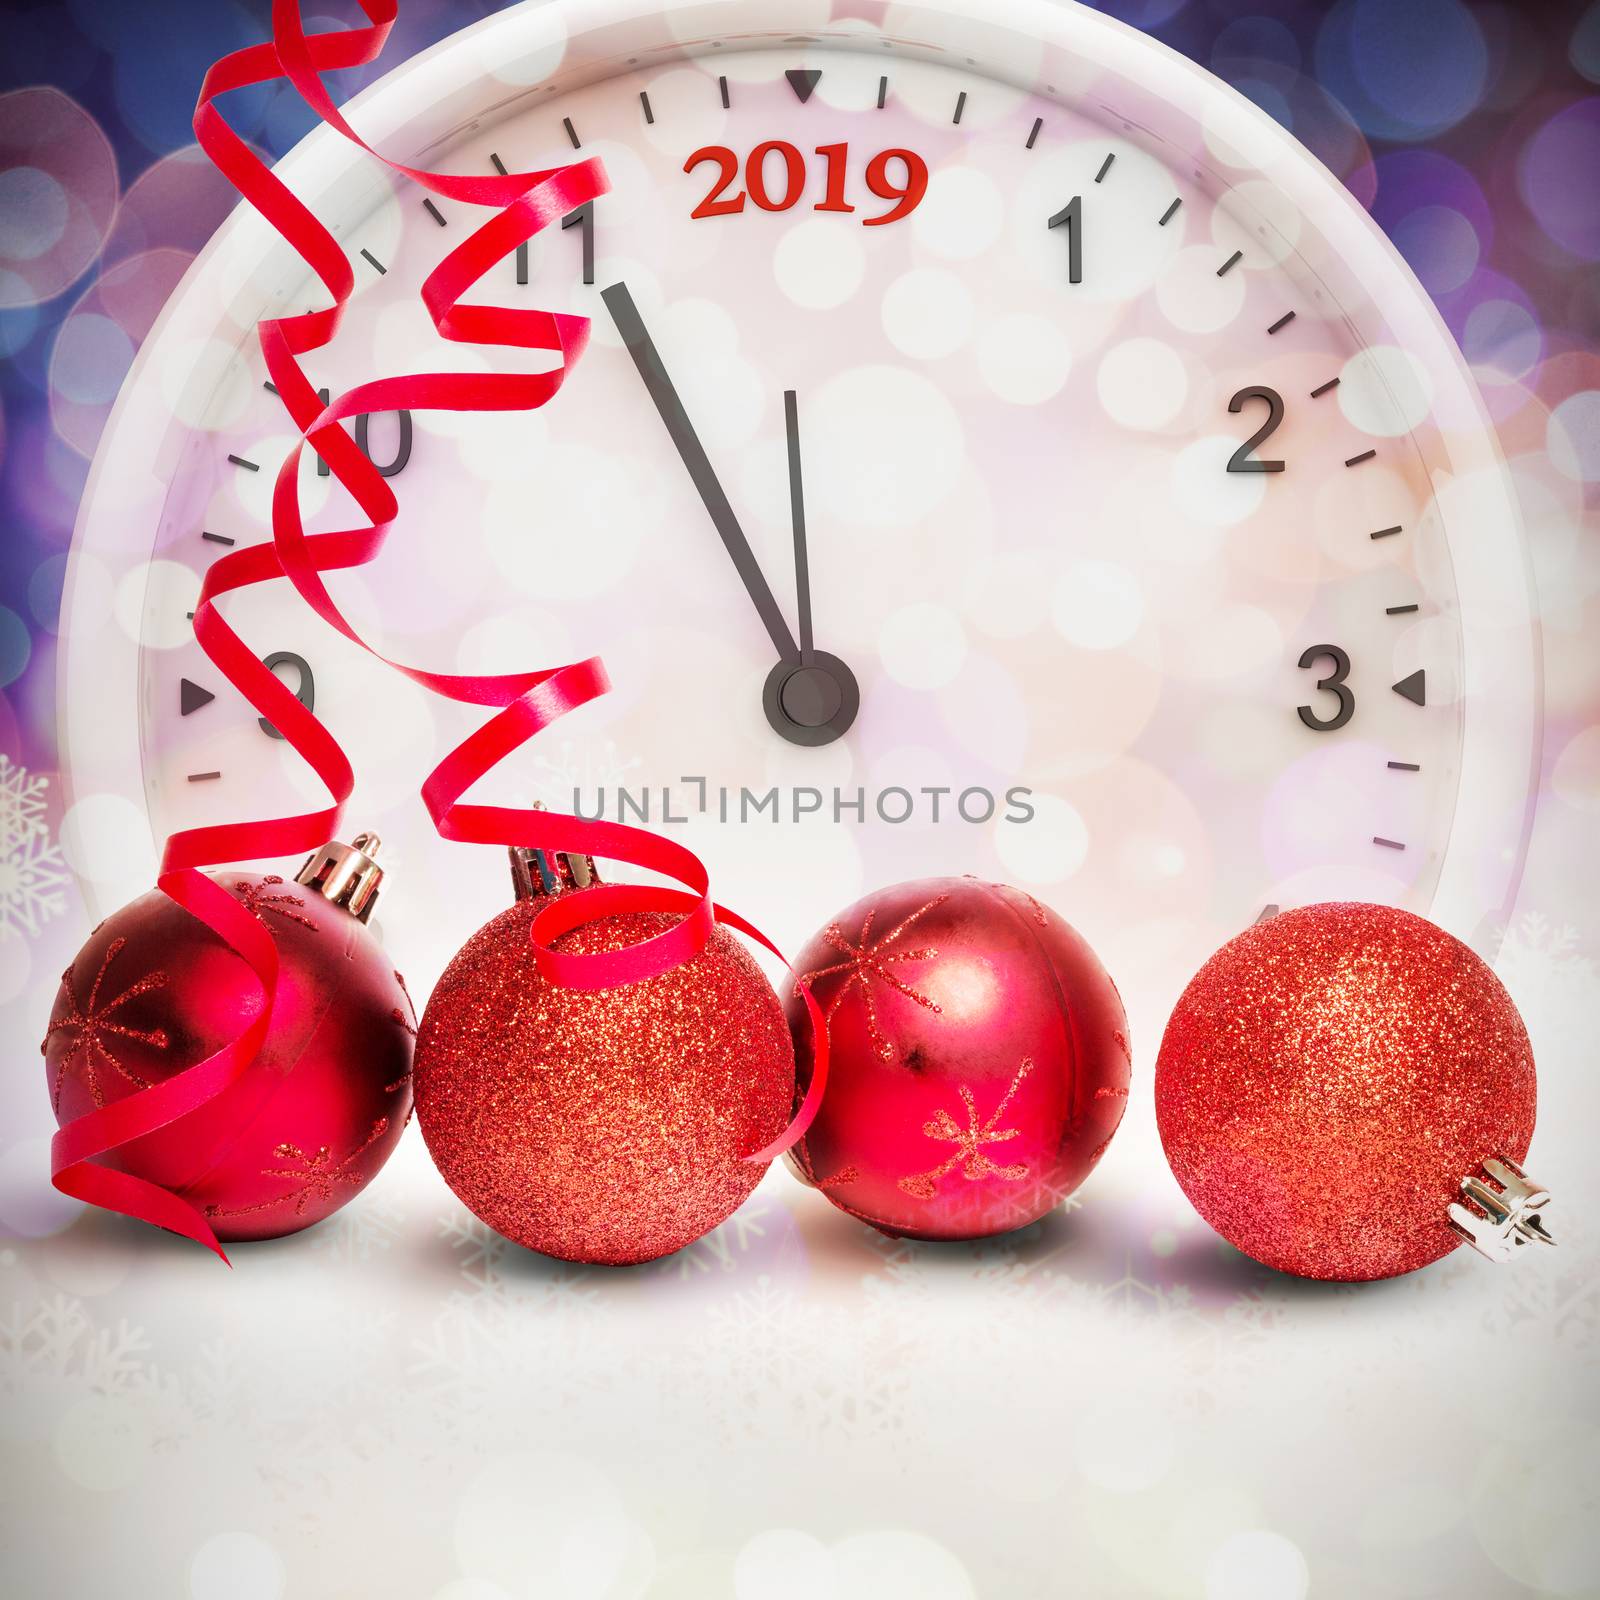 Composite image of four red christmas ball decorations by Wavebreakmedia